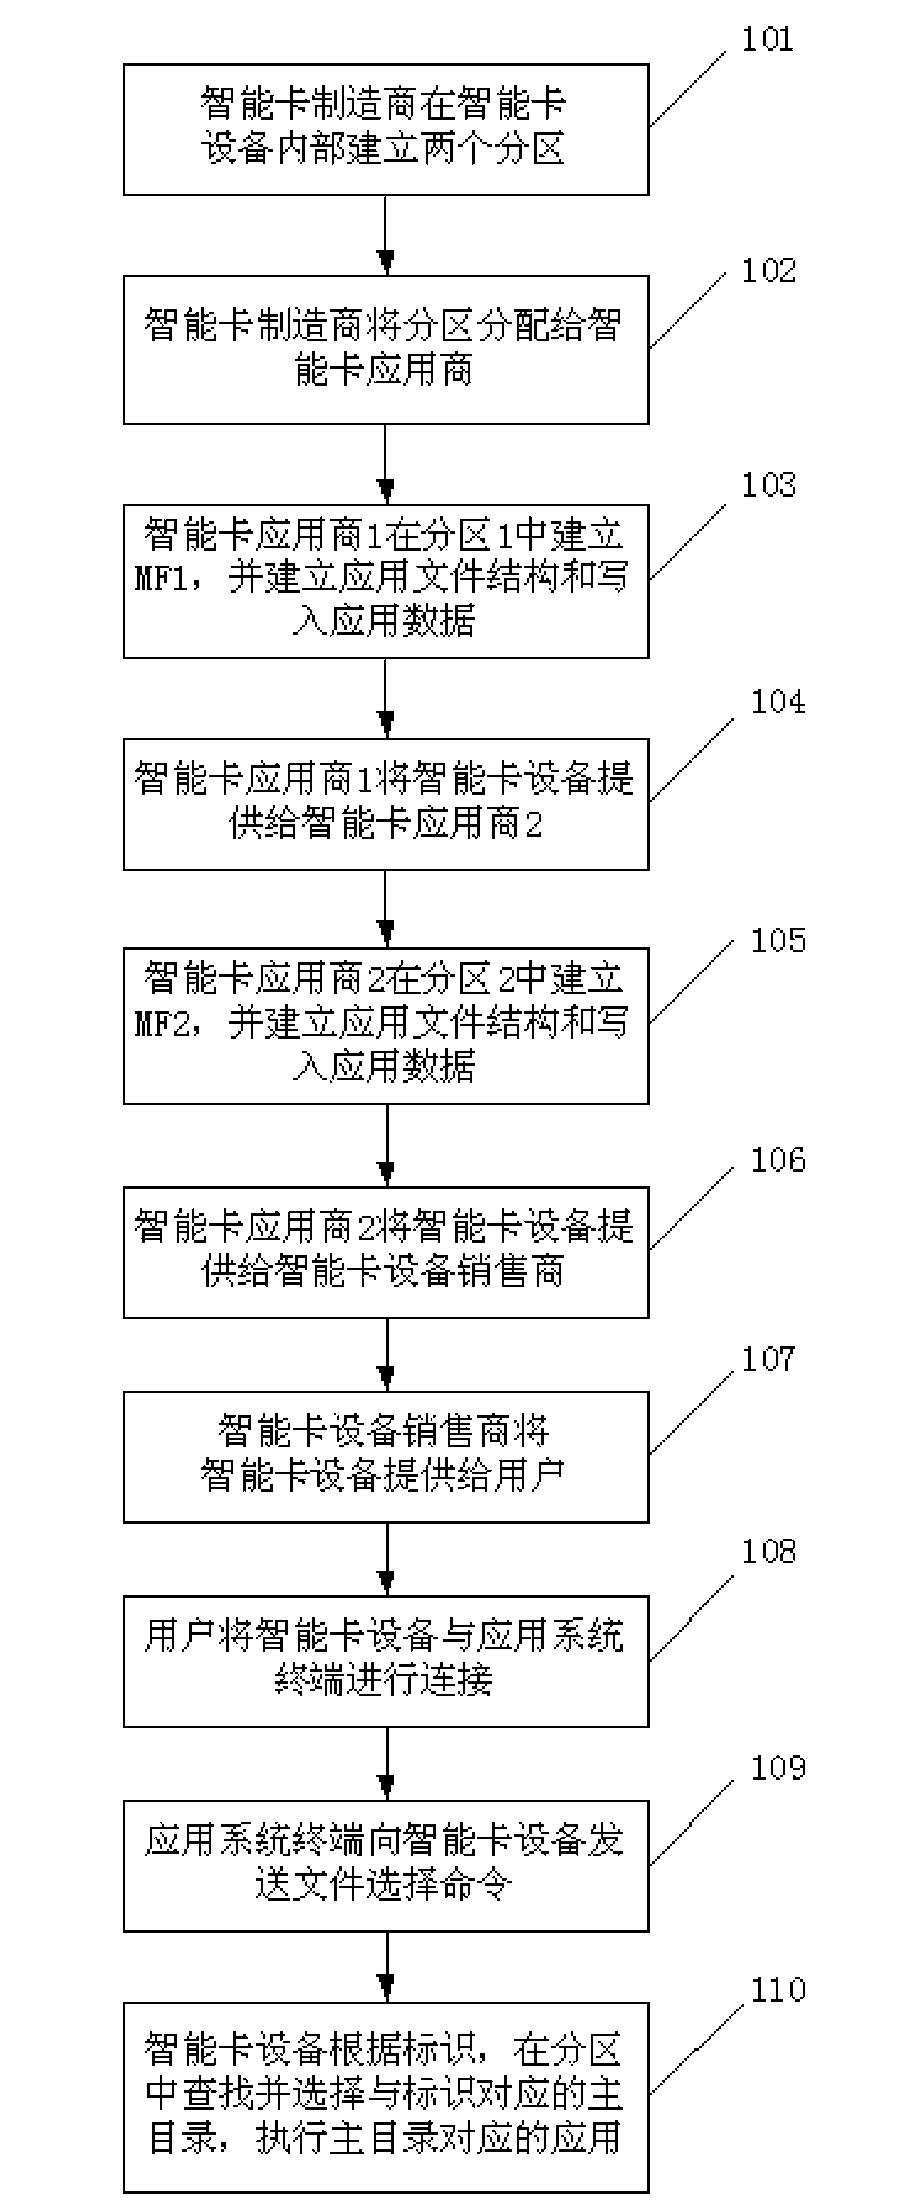 Implementation method of multi-functional smart card device